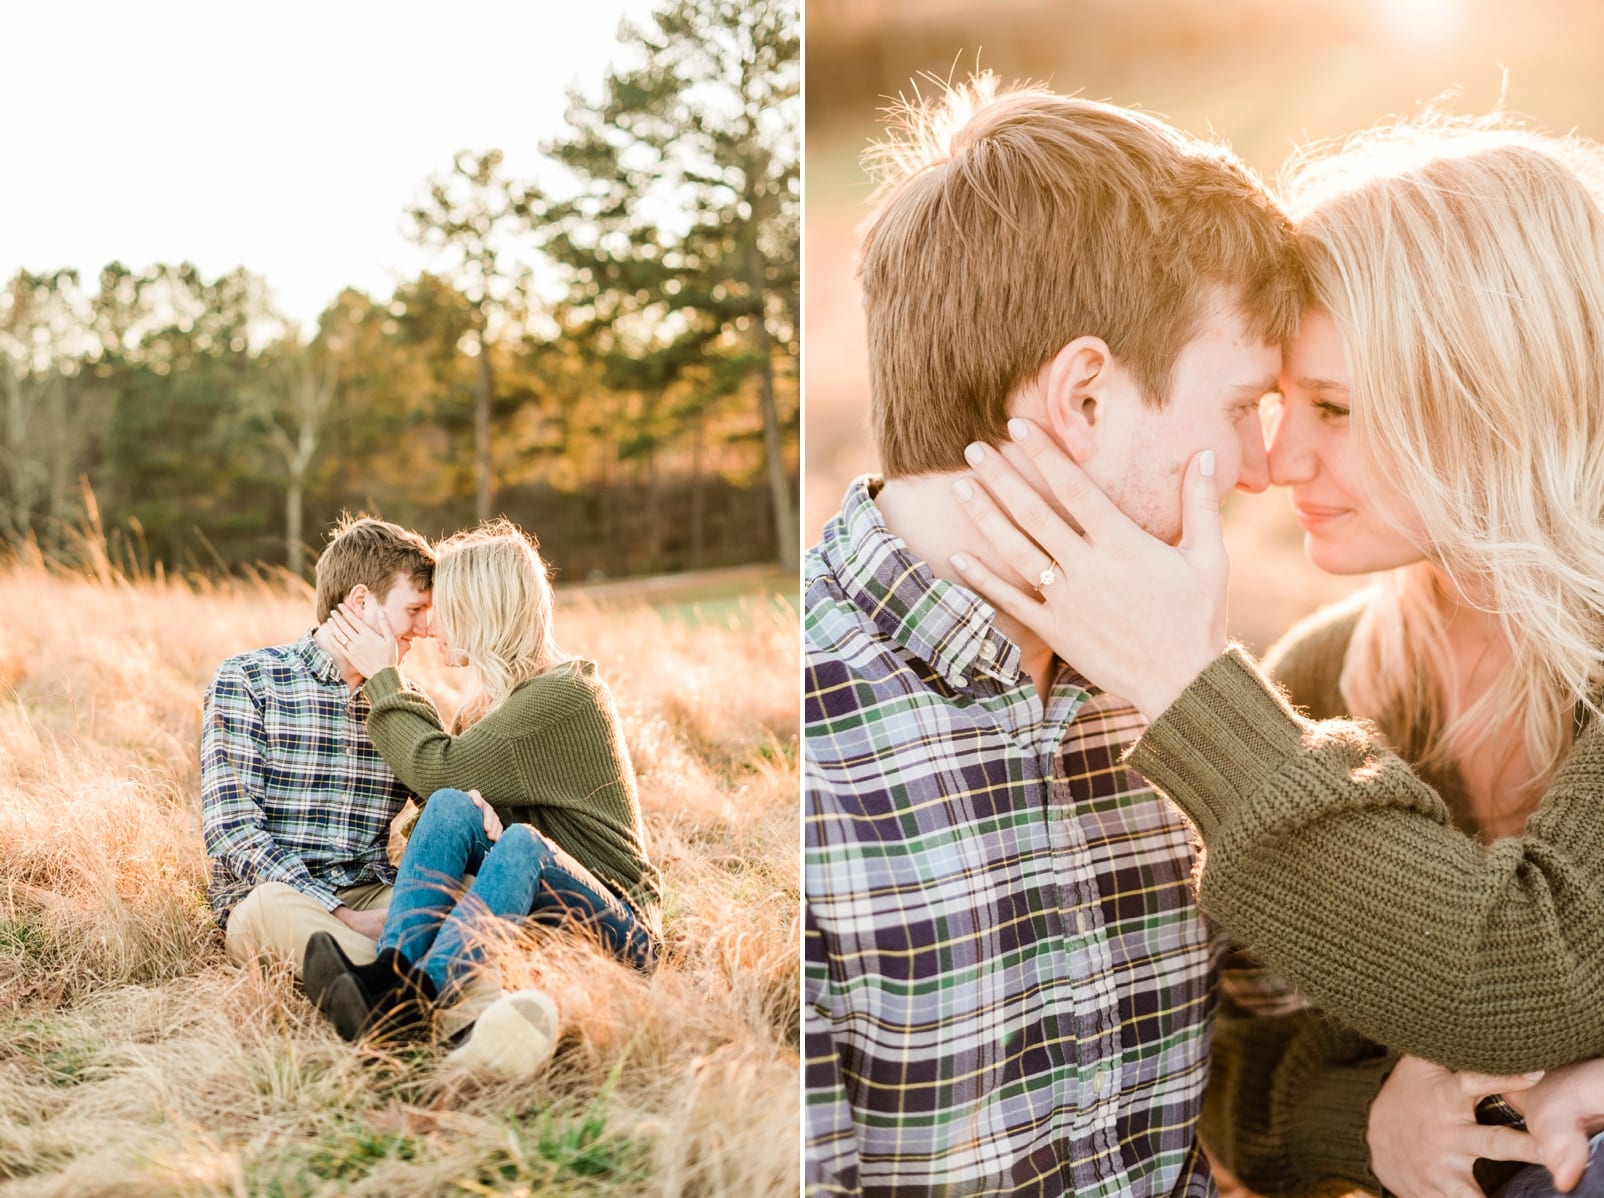 Winter engagement session at sunset with the couple snuggling and leaning their heads together photo